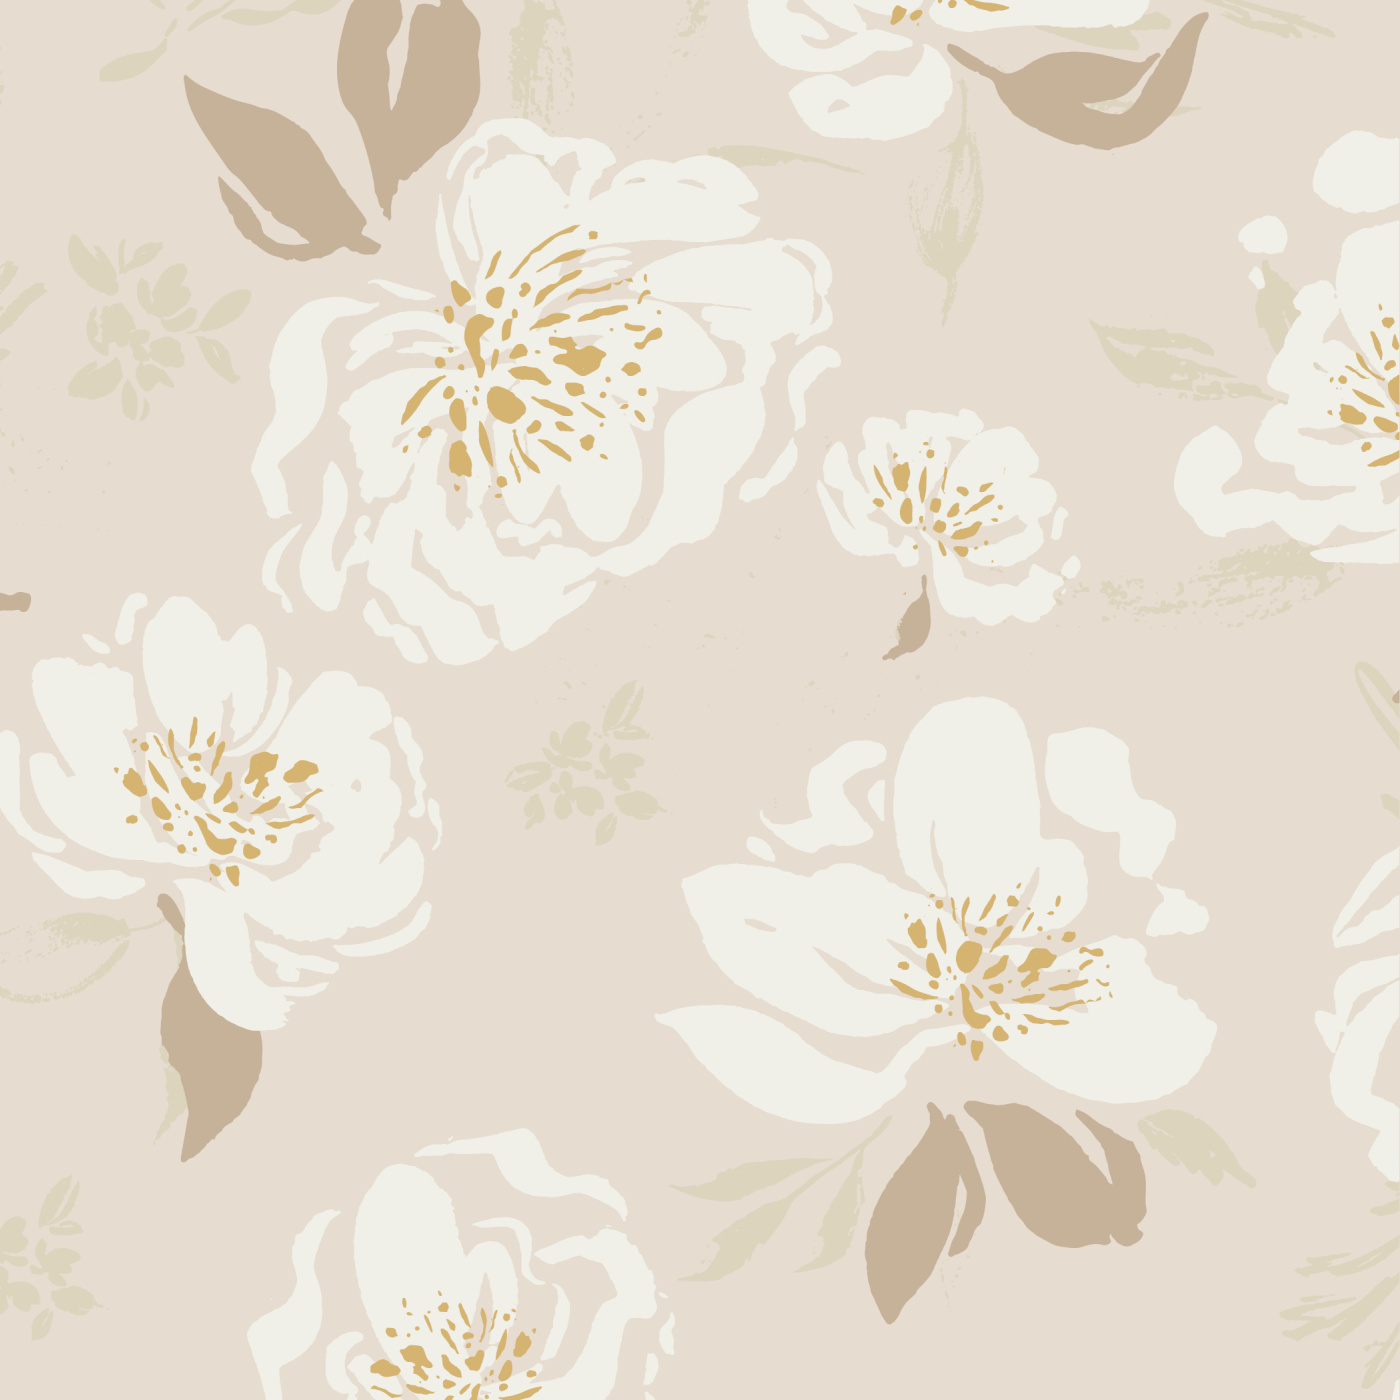 Free Vector  Vintage neutral floral pattern background remix from public  domain artwork